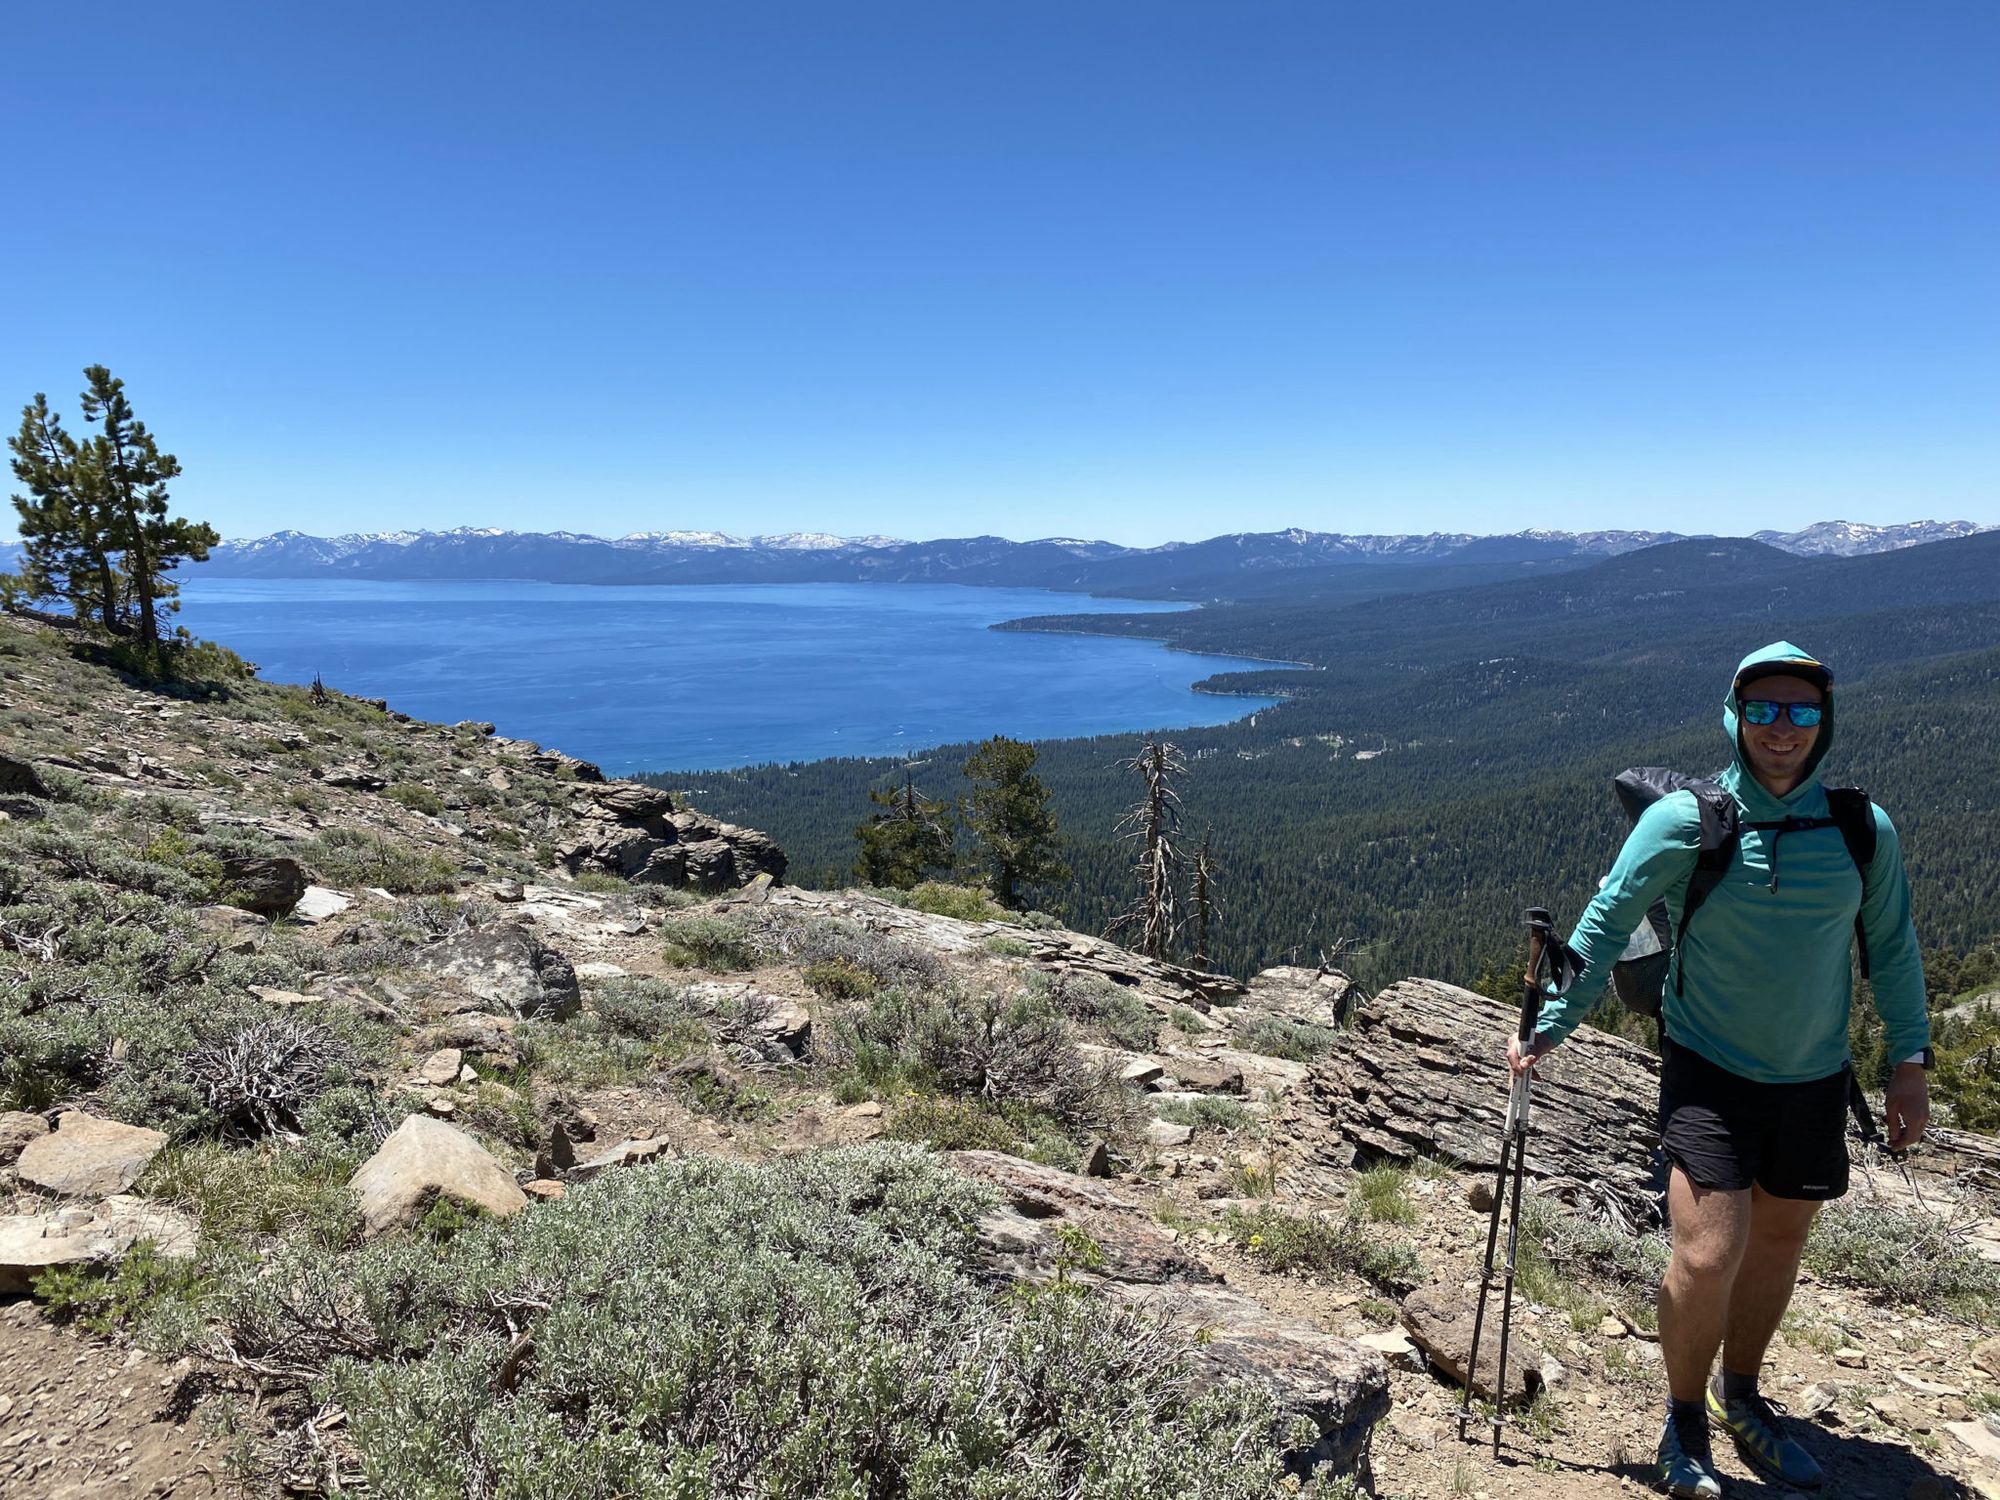 A hiker at a cliff overlooking Lake Tahoe